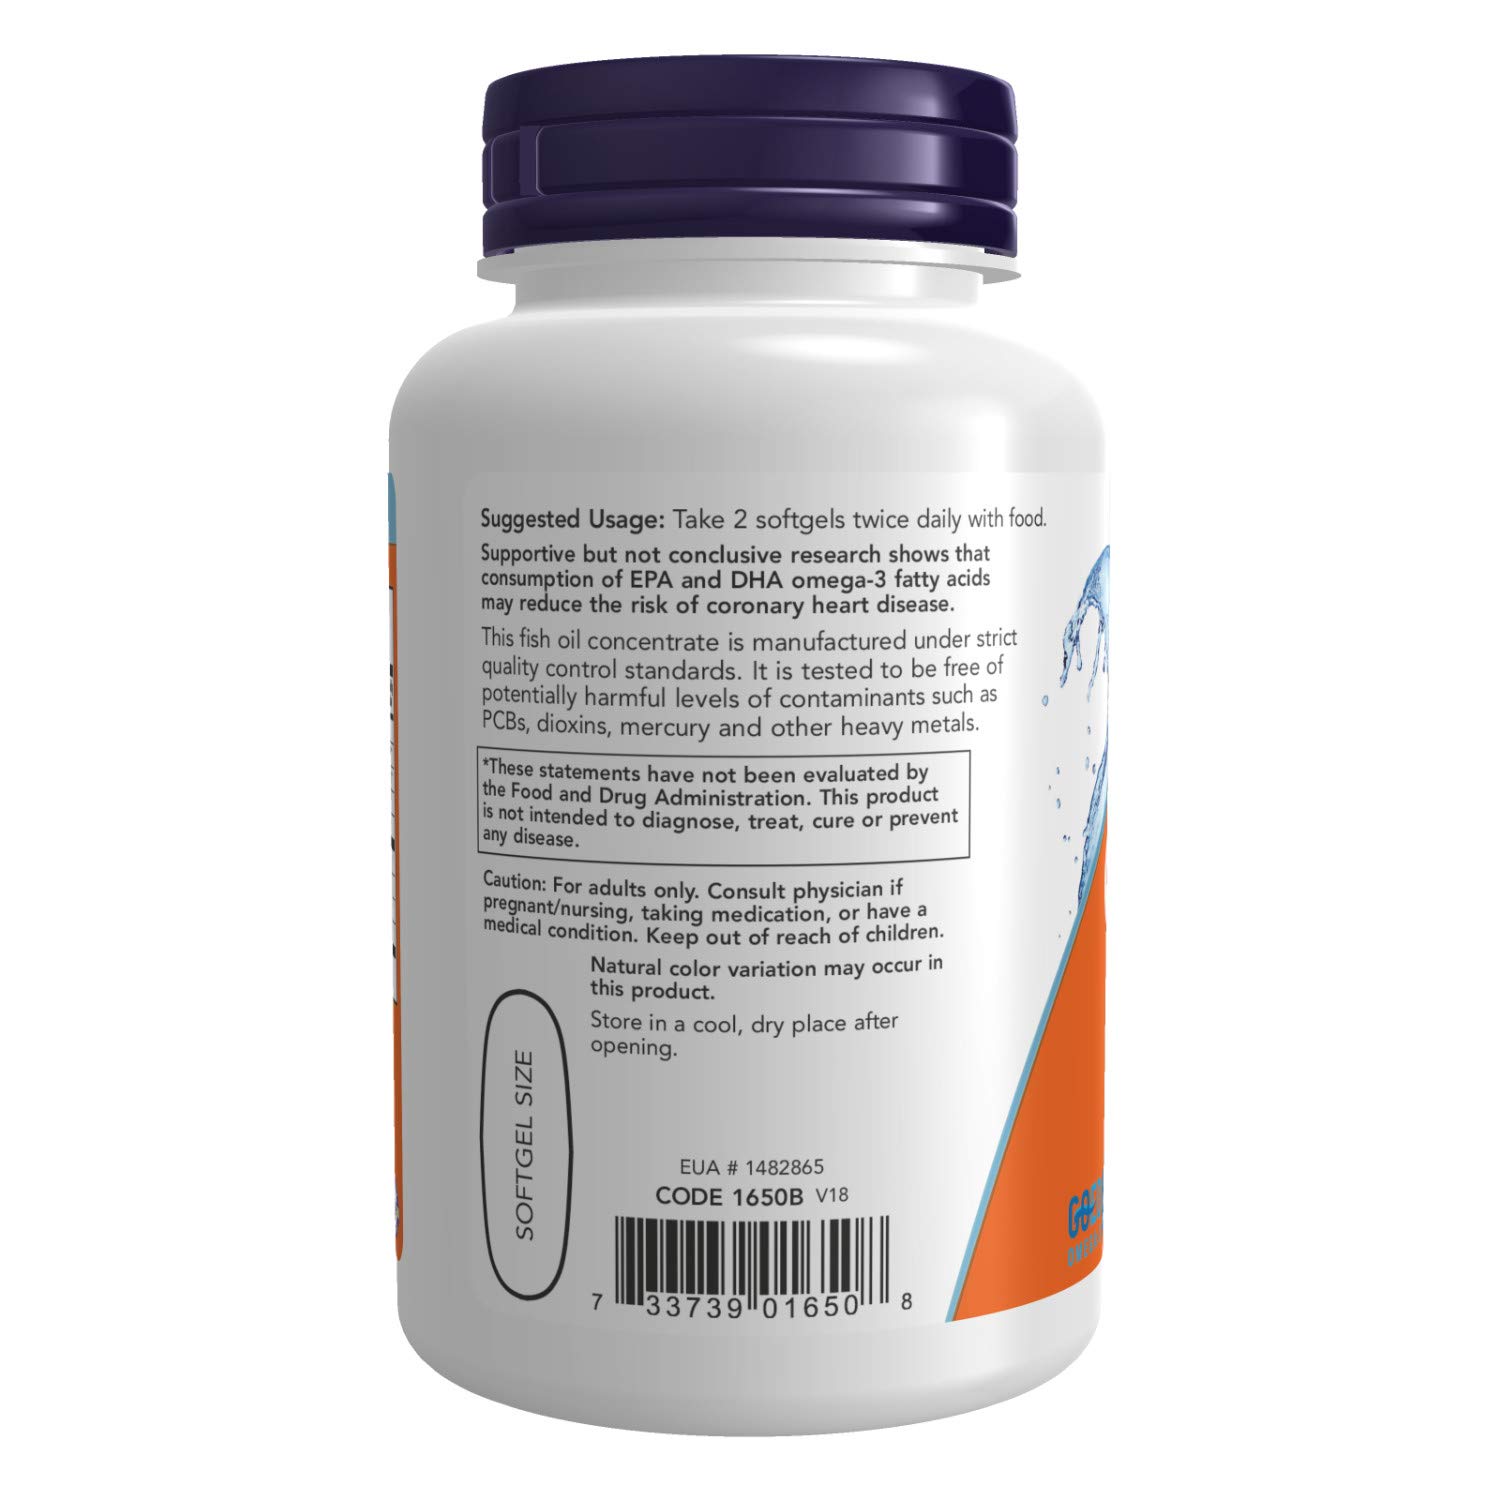 Image Of Now Foods Omega 3, Fish Oil, Molecularly Distilled Softgels Beast Nutrition